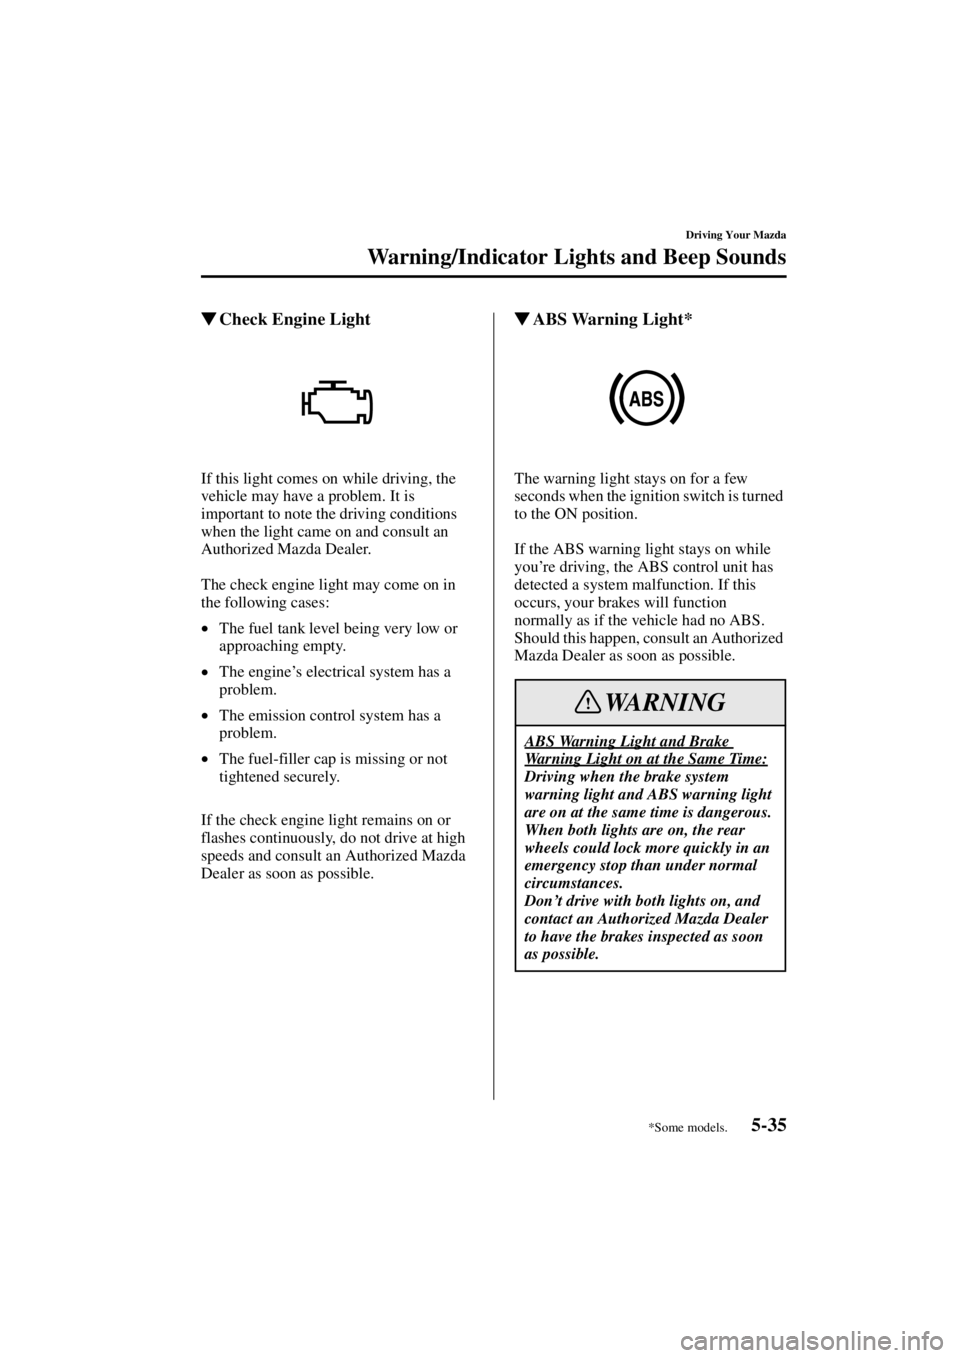 MAZDA MODEL 3 4-DOOR 2004  Owners Manual 5-35
Driving Your Mazda
Warning/Indicator Lights and Beep Sounds
Form No. 8S18-EA-03I
Check Engine Light
If this light comes on while driving, the 
vehicle may have a problem. It is 
important to not